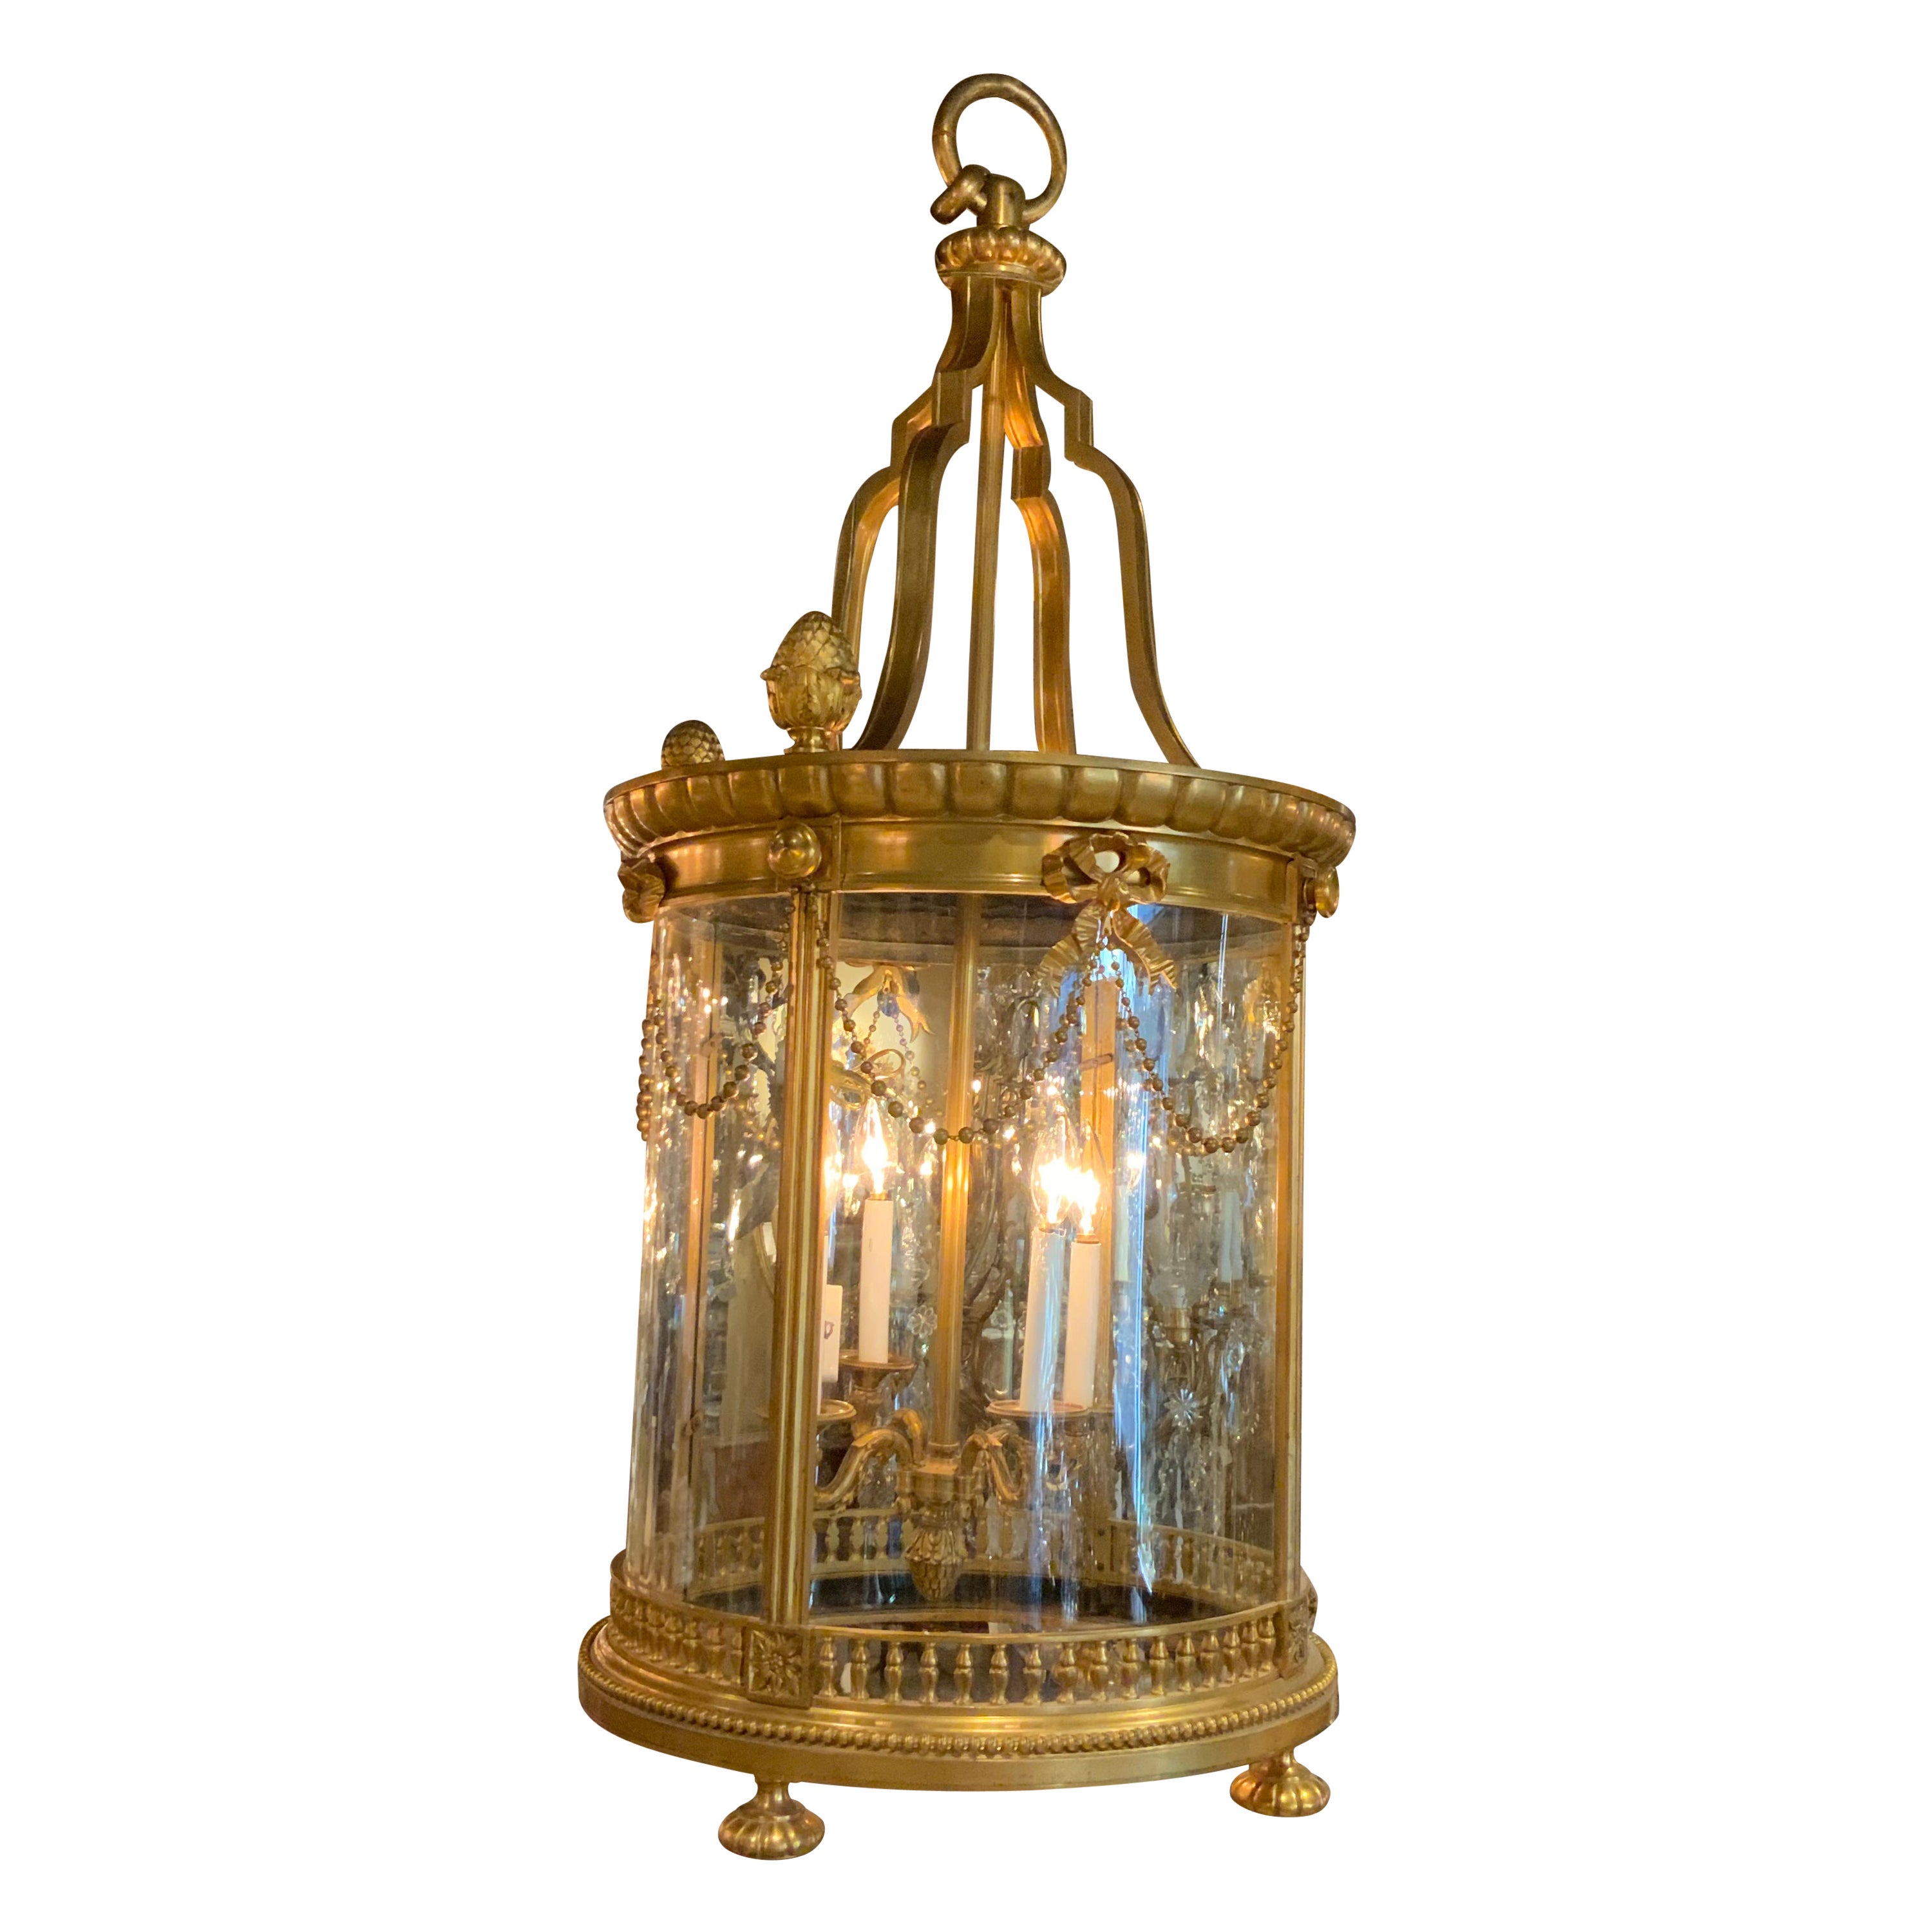 Palace Size Impressive Bronze Dore Lantern 19th C. with Bows and Swags 4 Lights For Sale